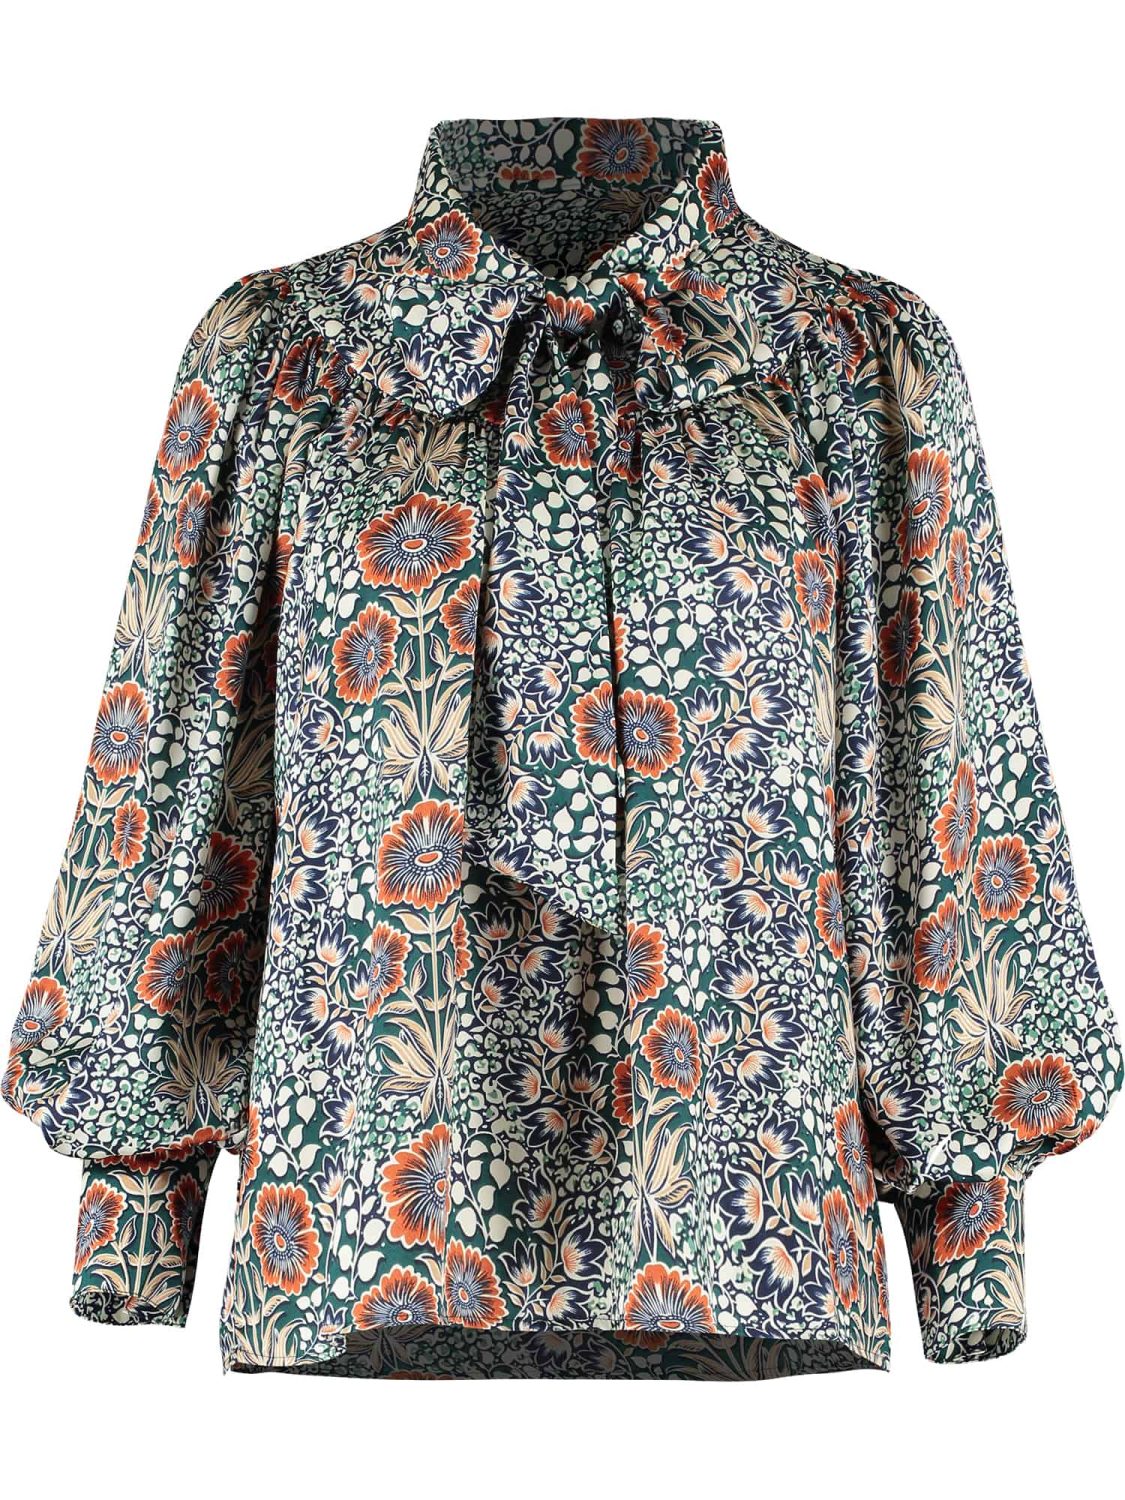 Liberty Print Floral Blouse - Laurie & Jules